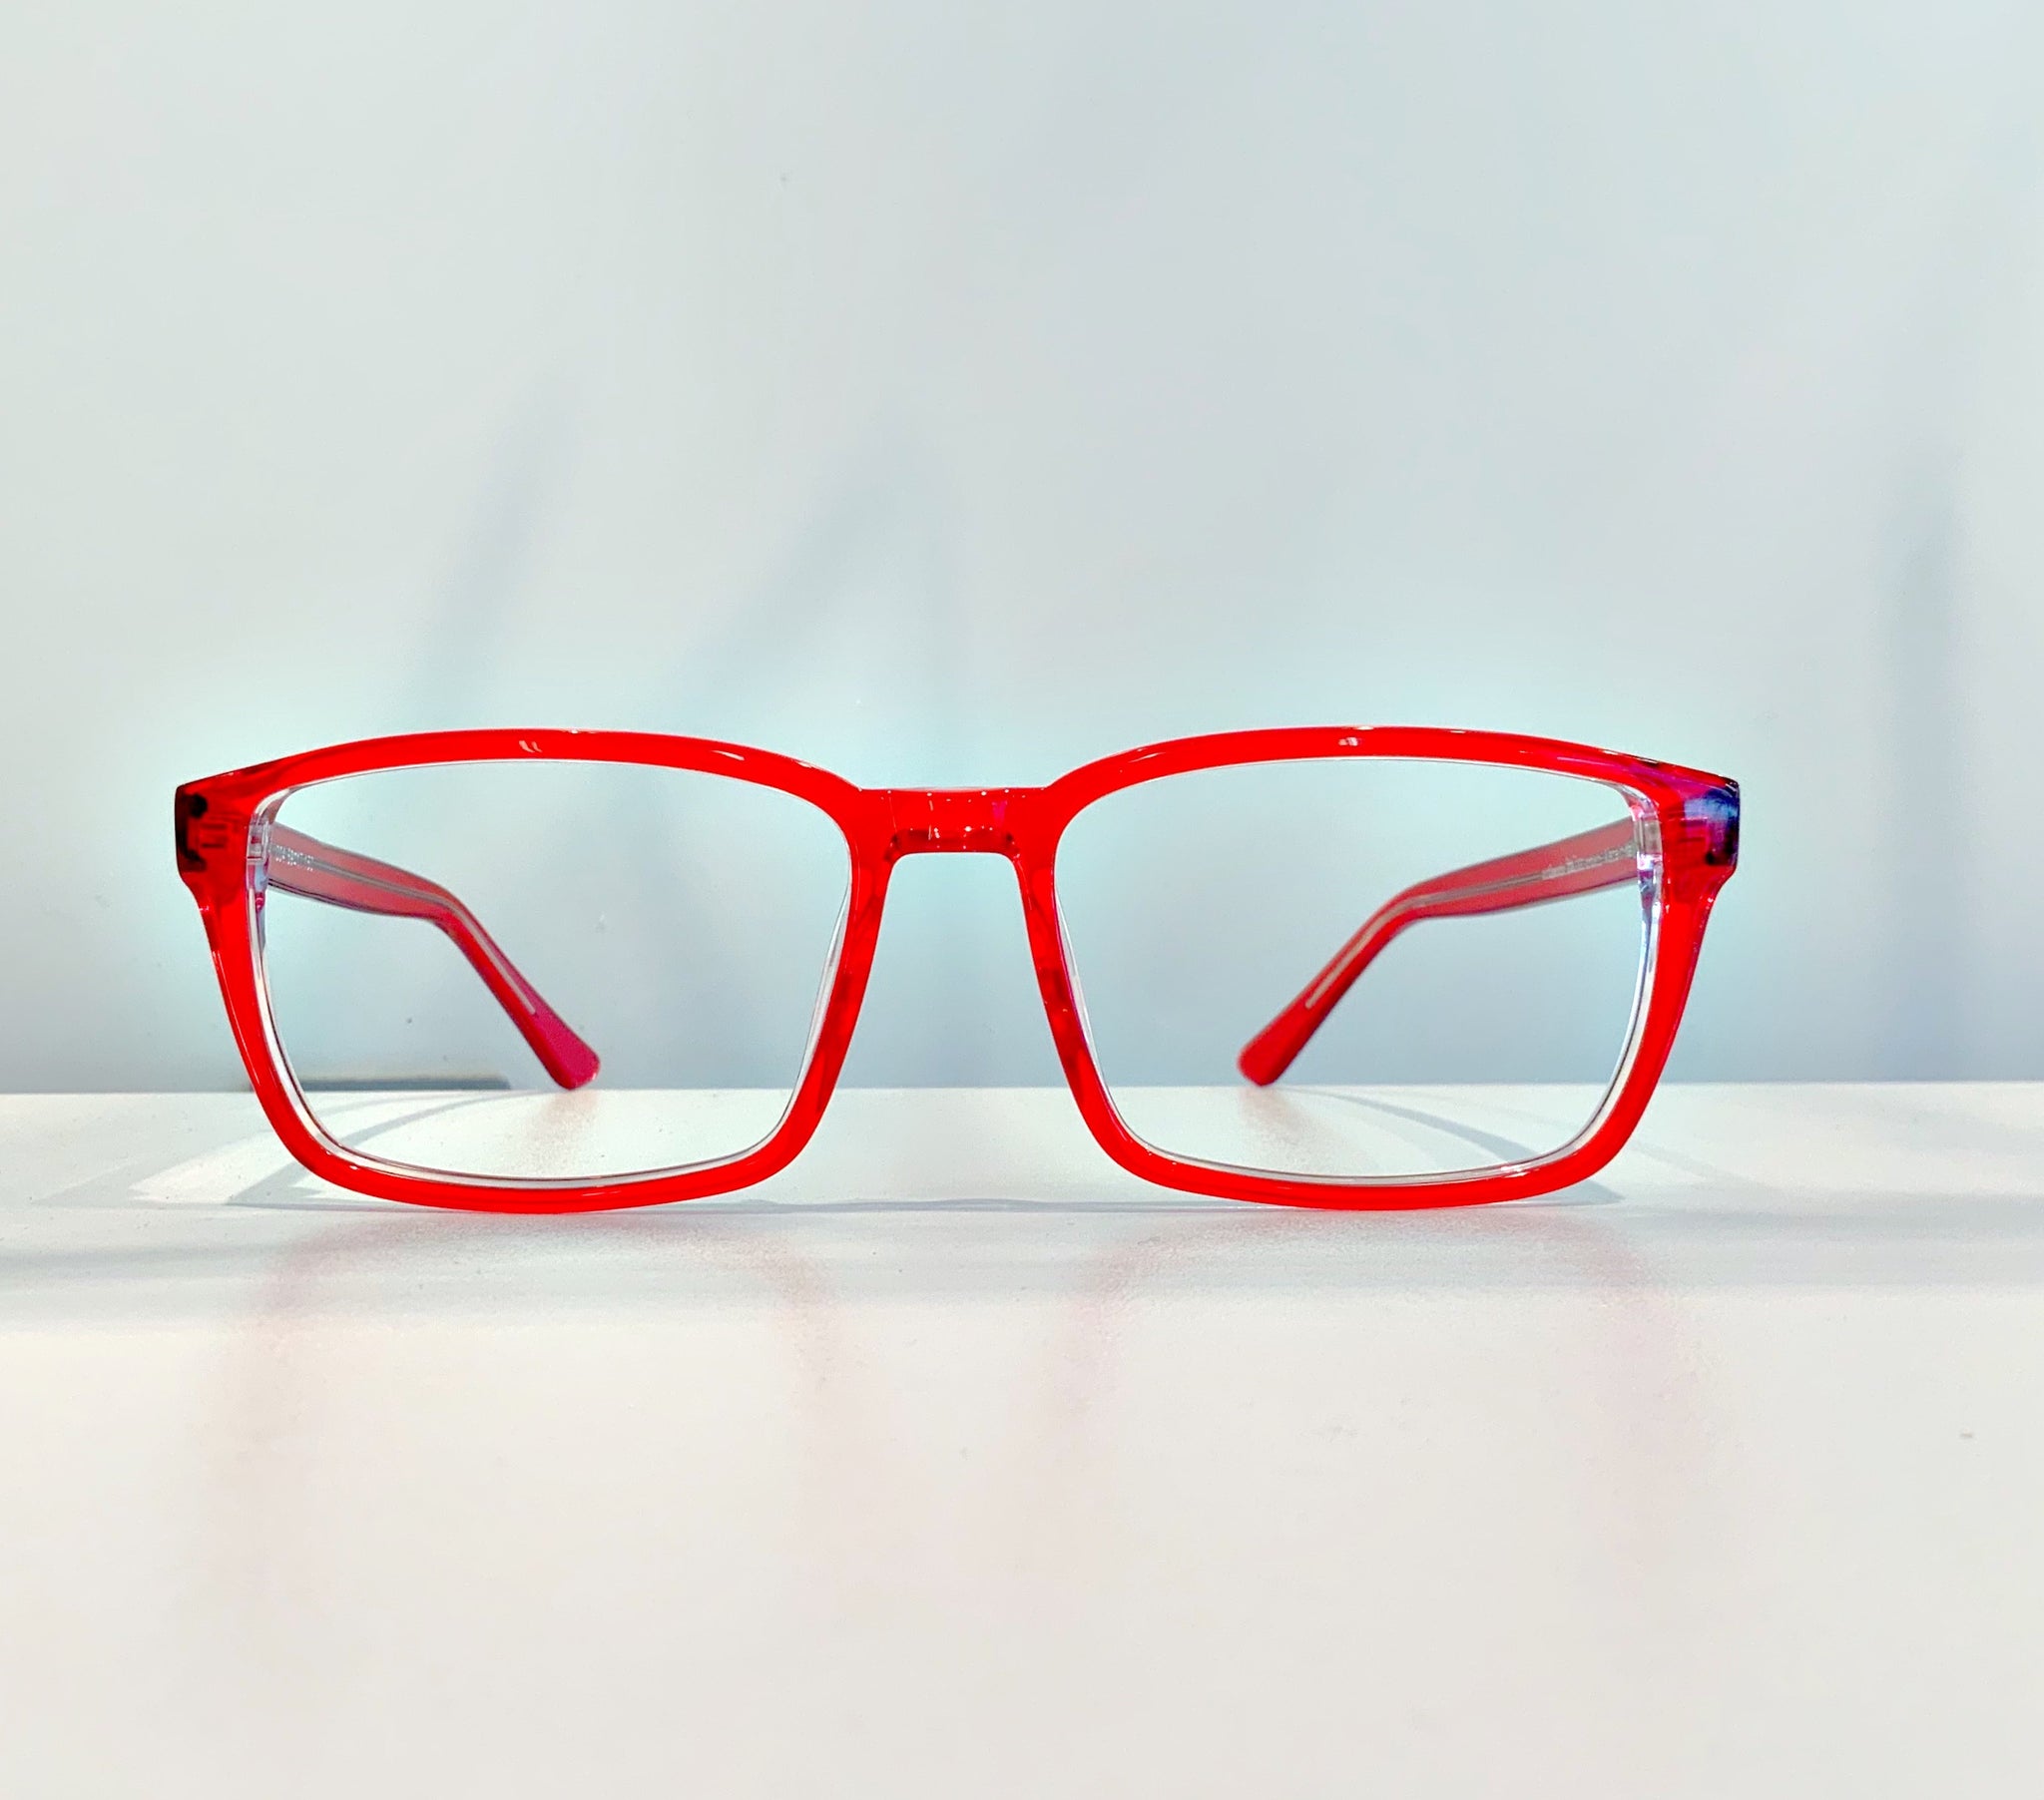 Oversized square red optical frame